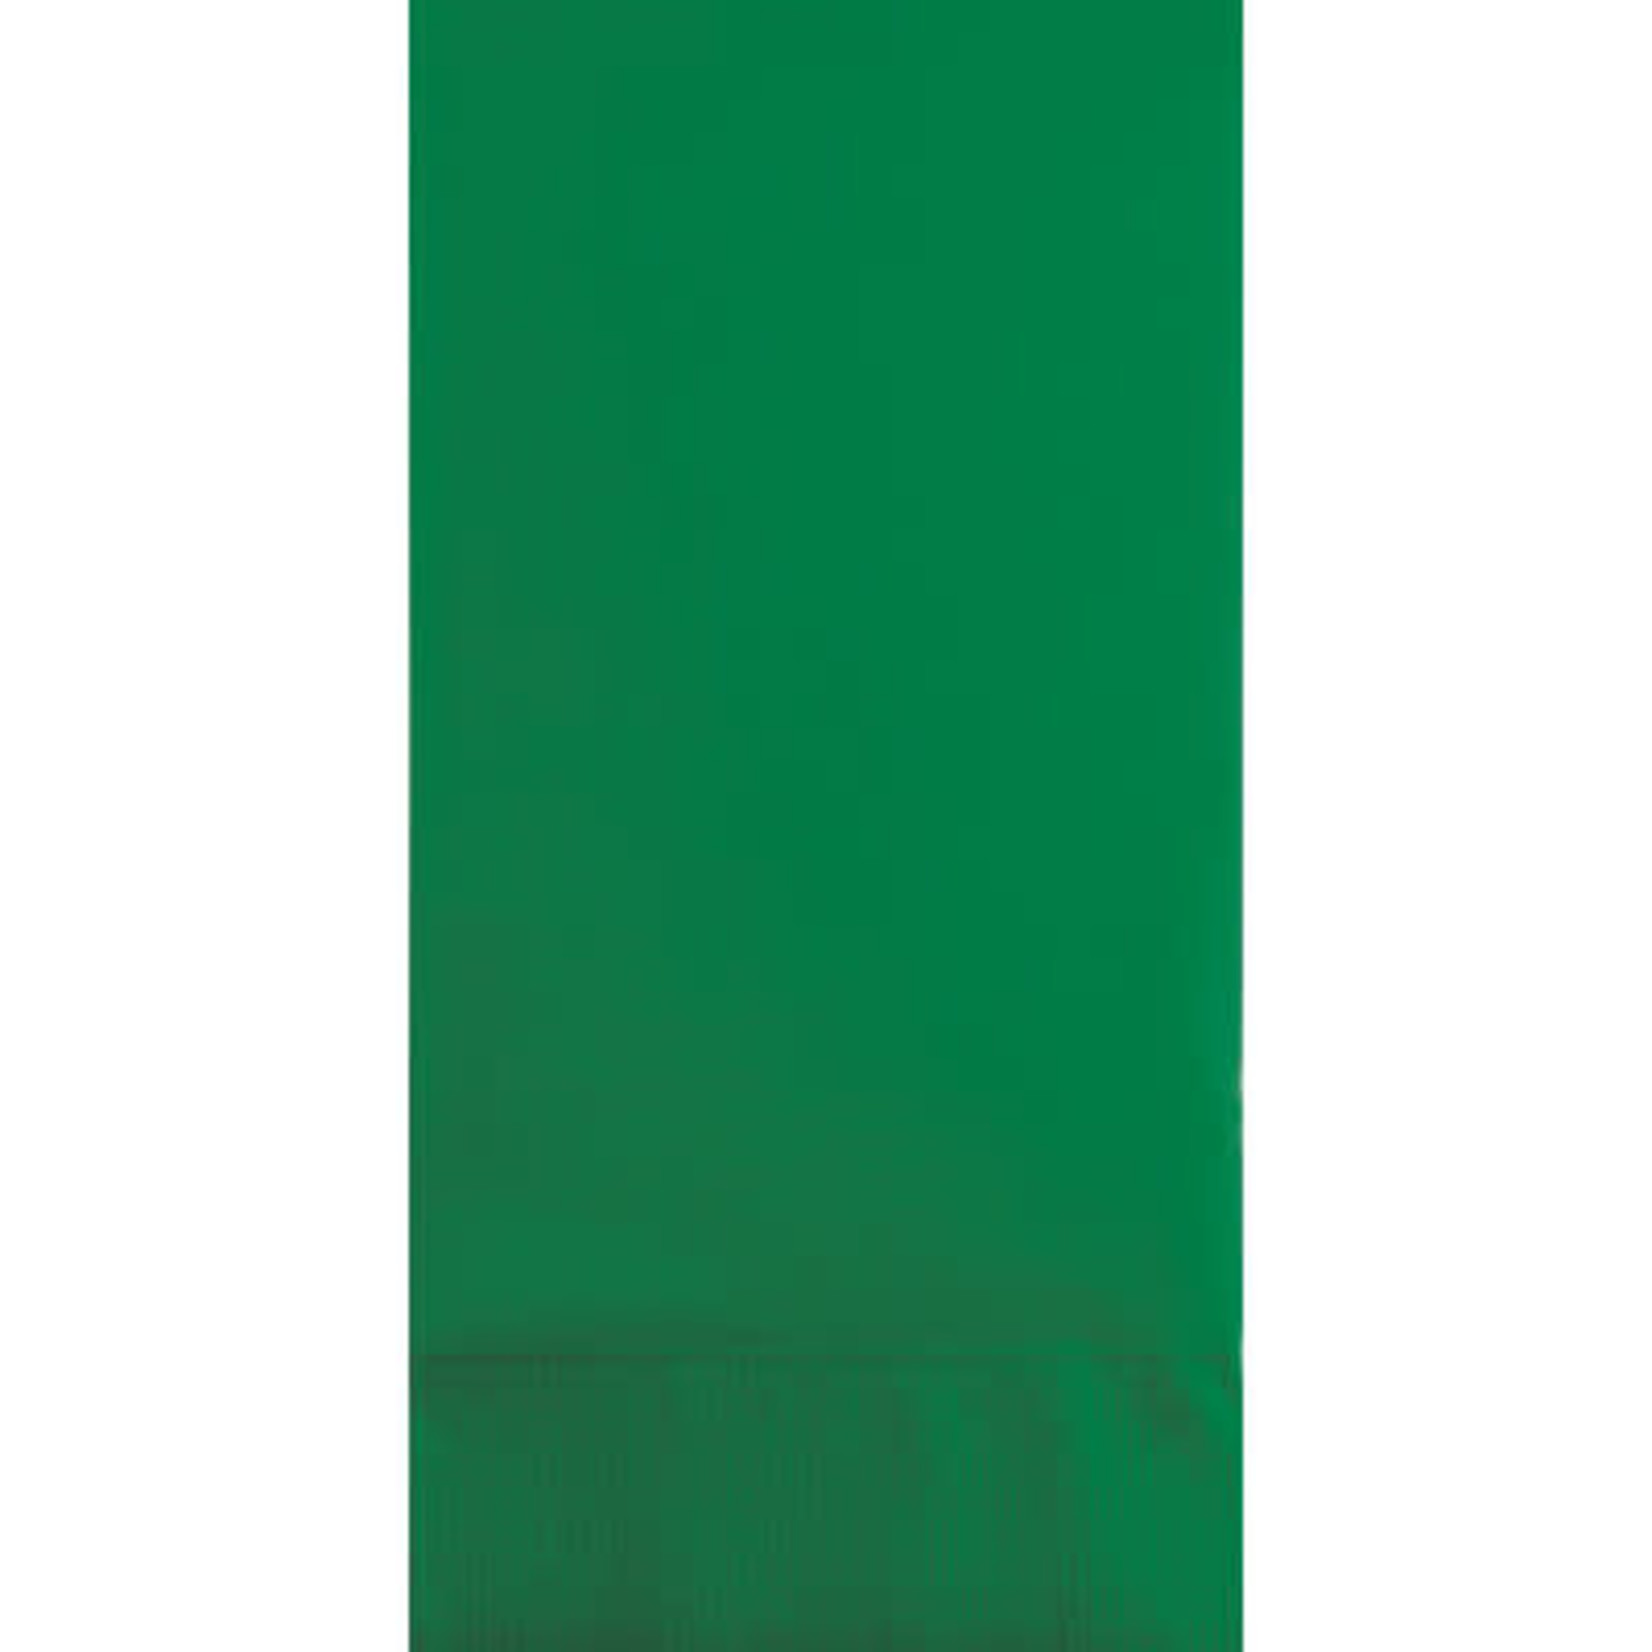 Touch of Color Emerald Green 3-Ply Guest Towels - 16ct.